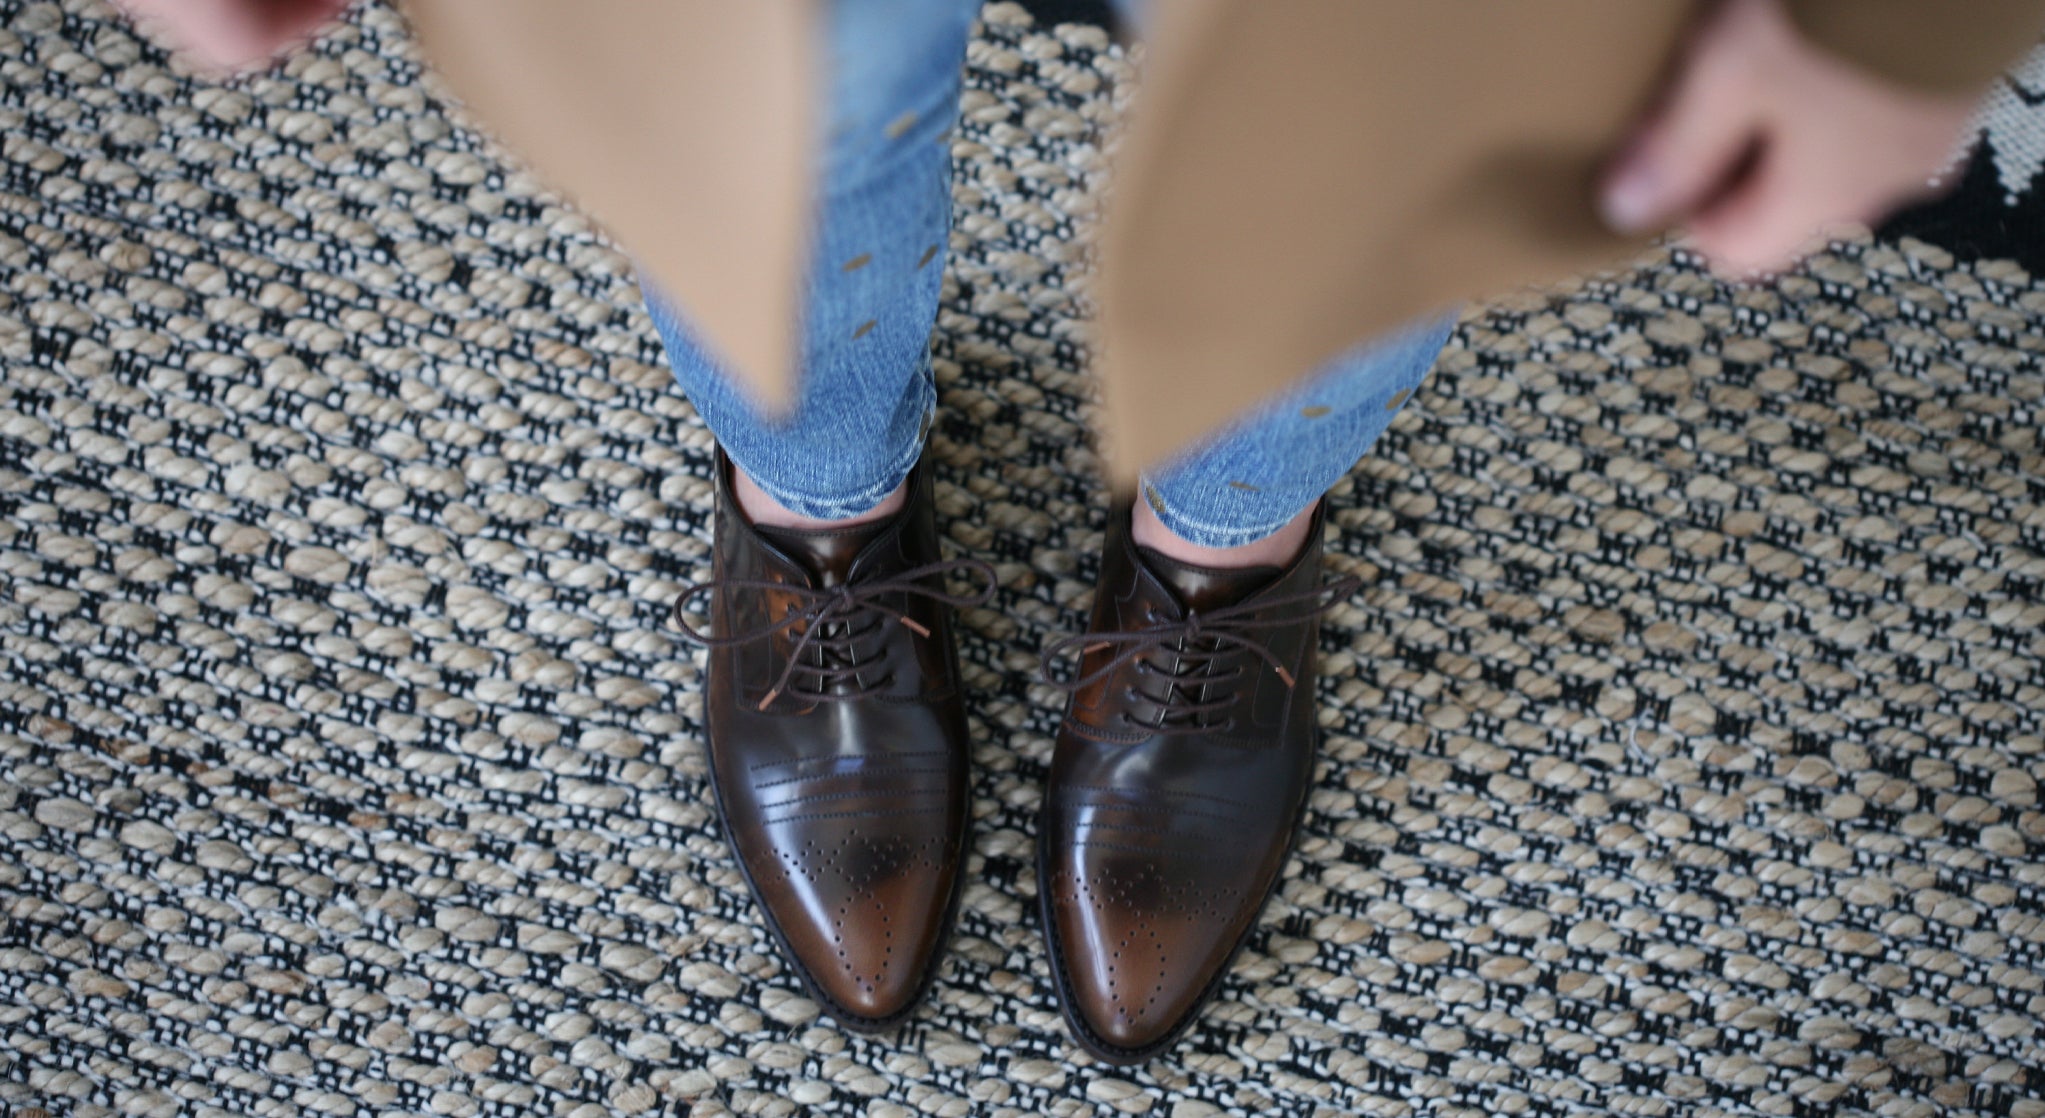 Work Shoes for Women - The Office of Angela Scott